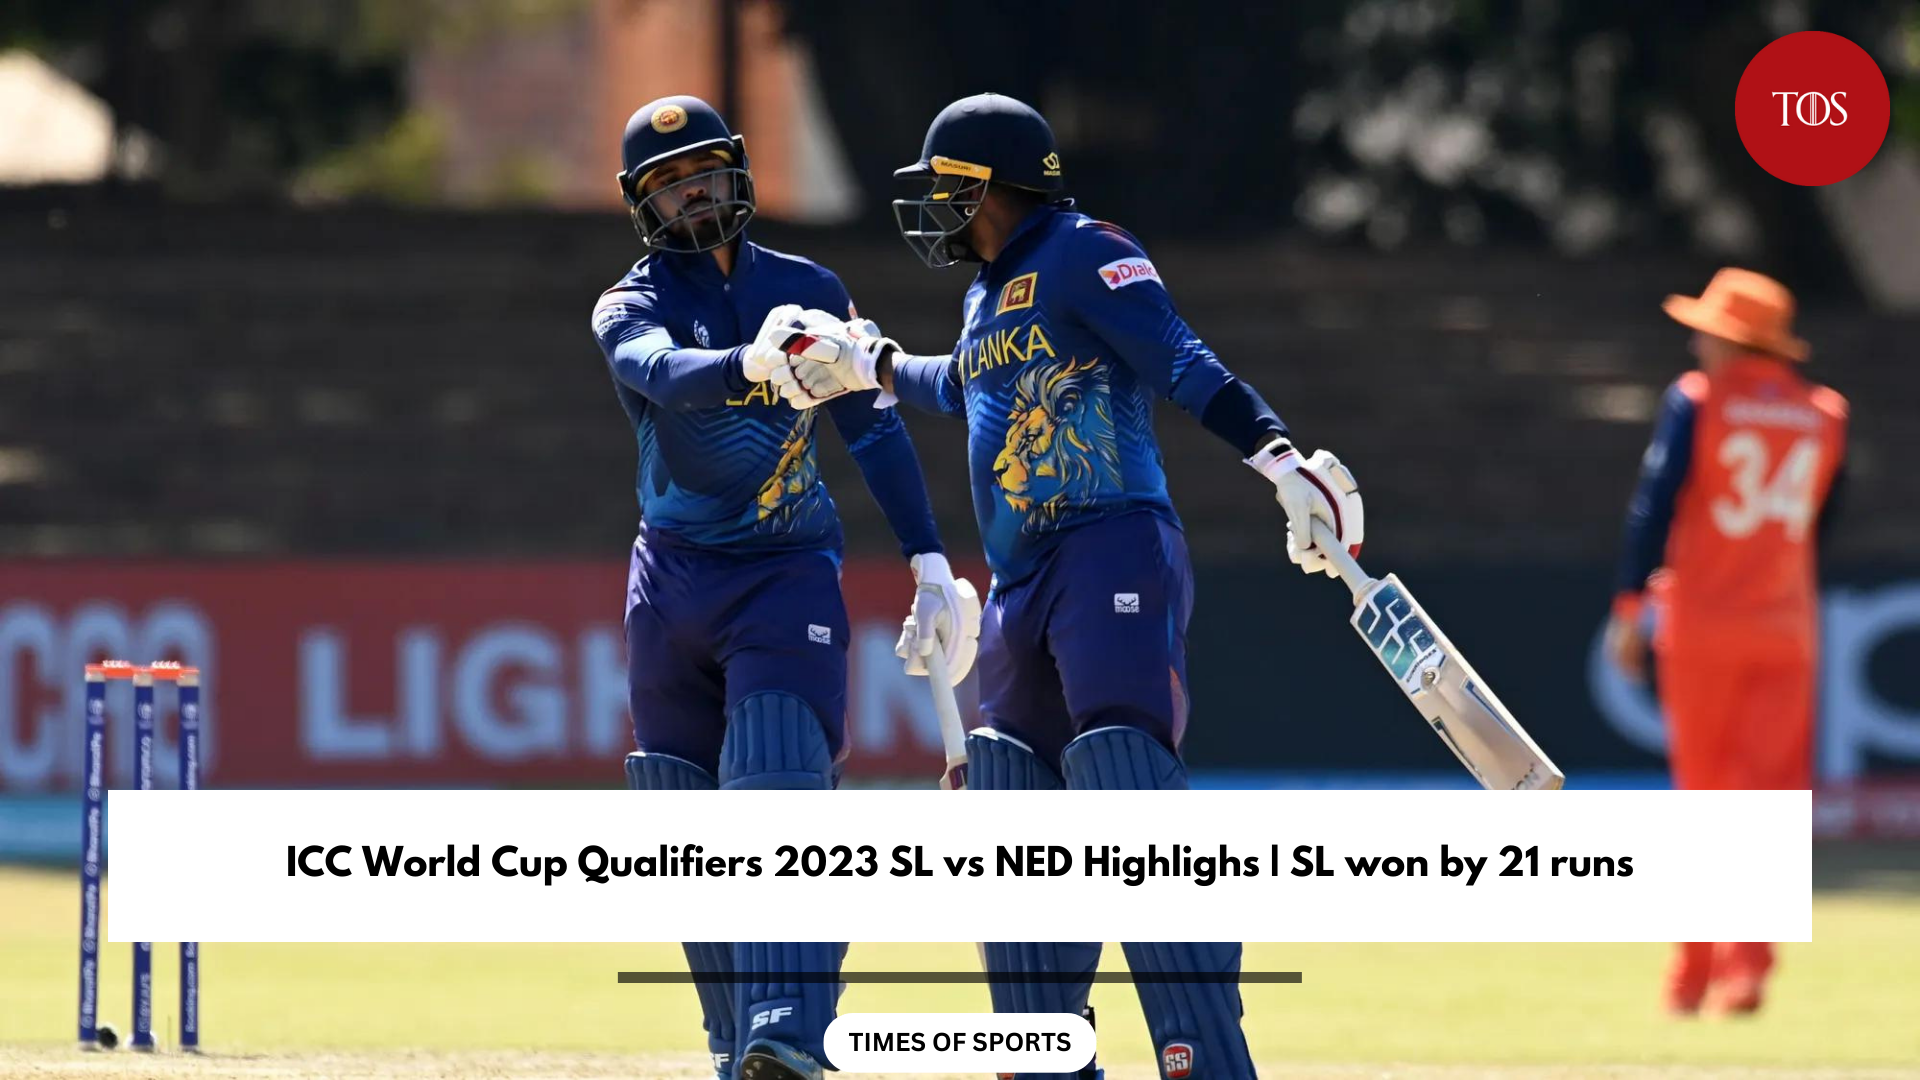 Icc World Cup Qualifiers 2023 Sl Vs Ned Highlights Sl Won By 21 Runs 5093